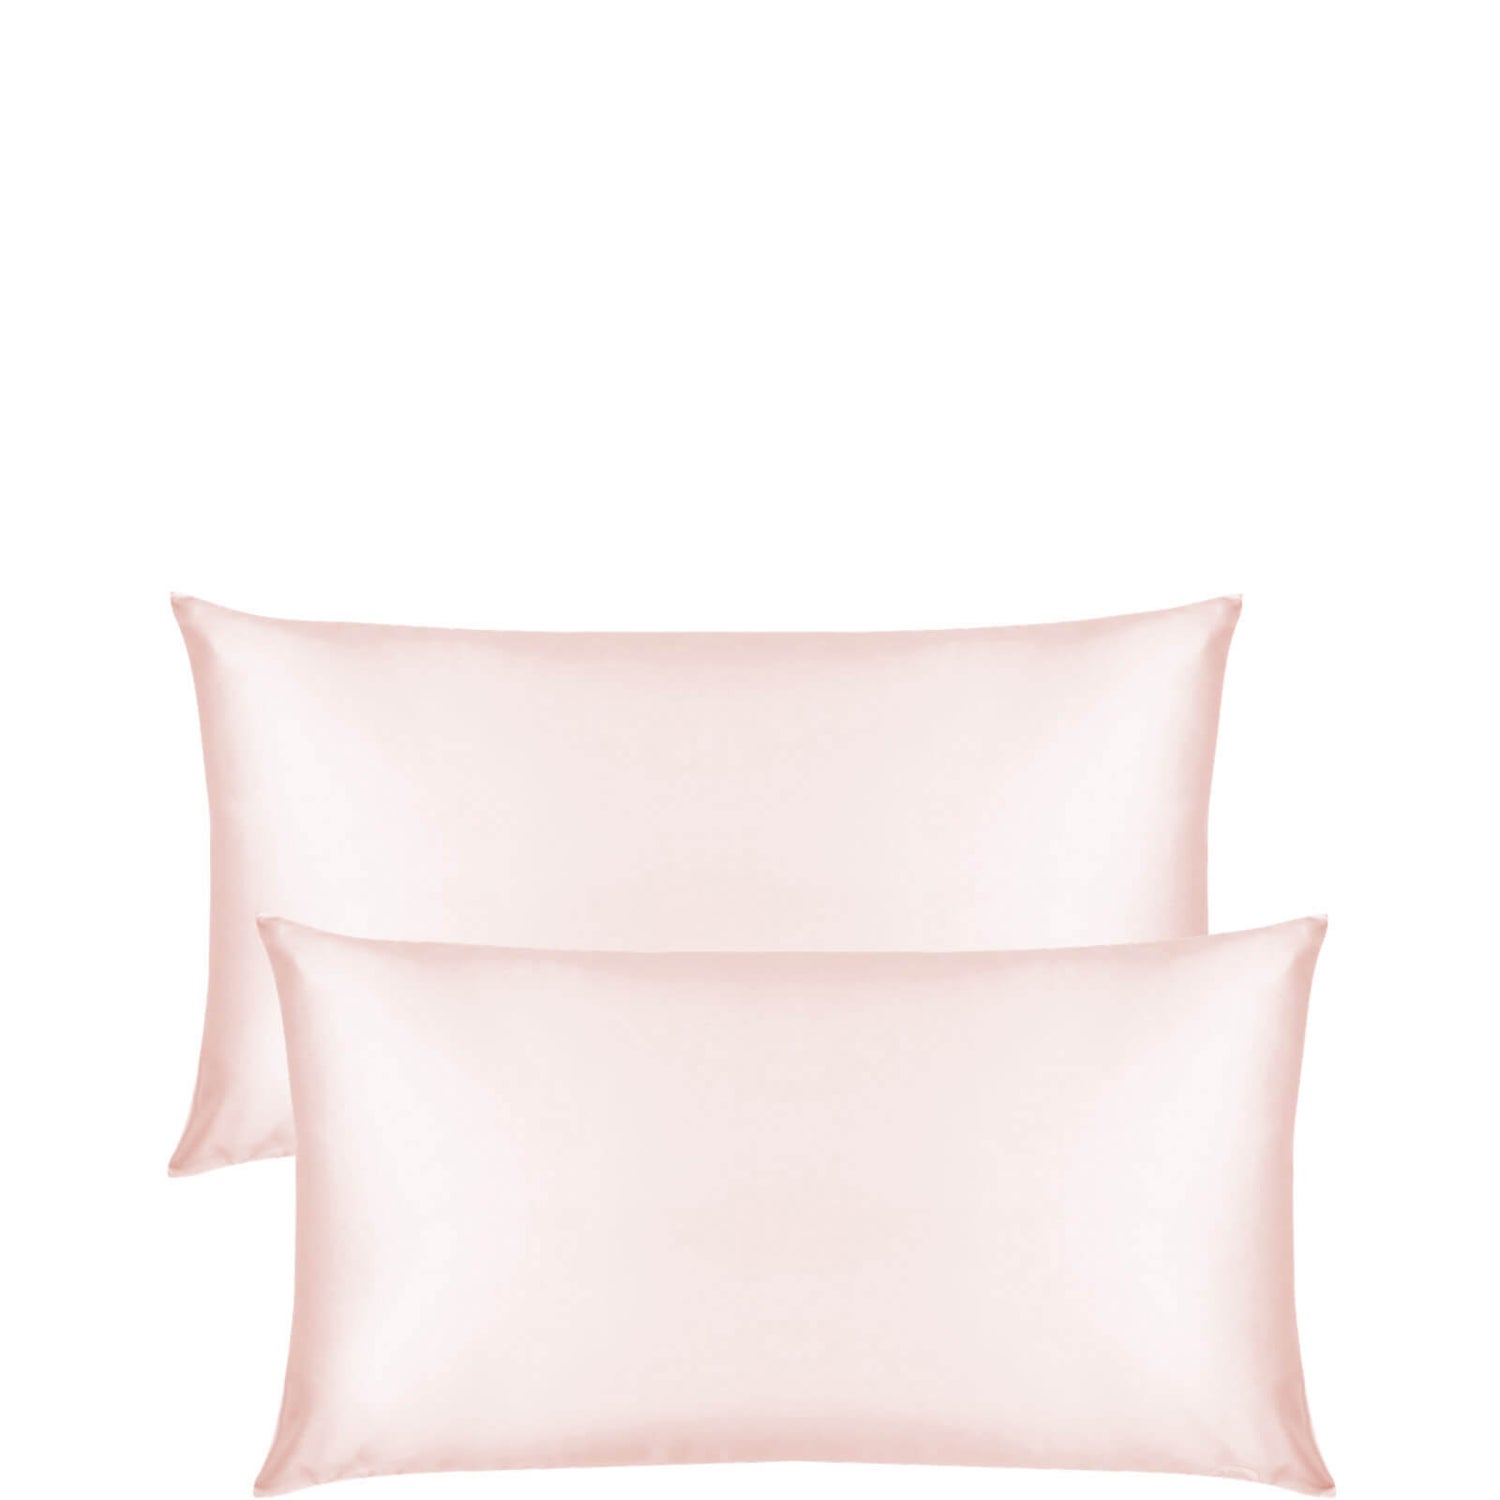 The Goodnight Co. Silk Pillowcase Twin Set King Size - Pink